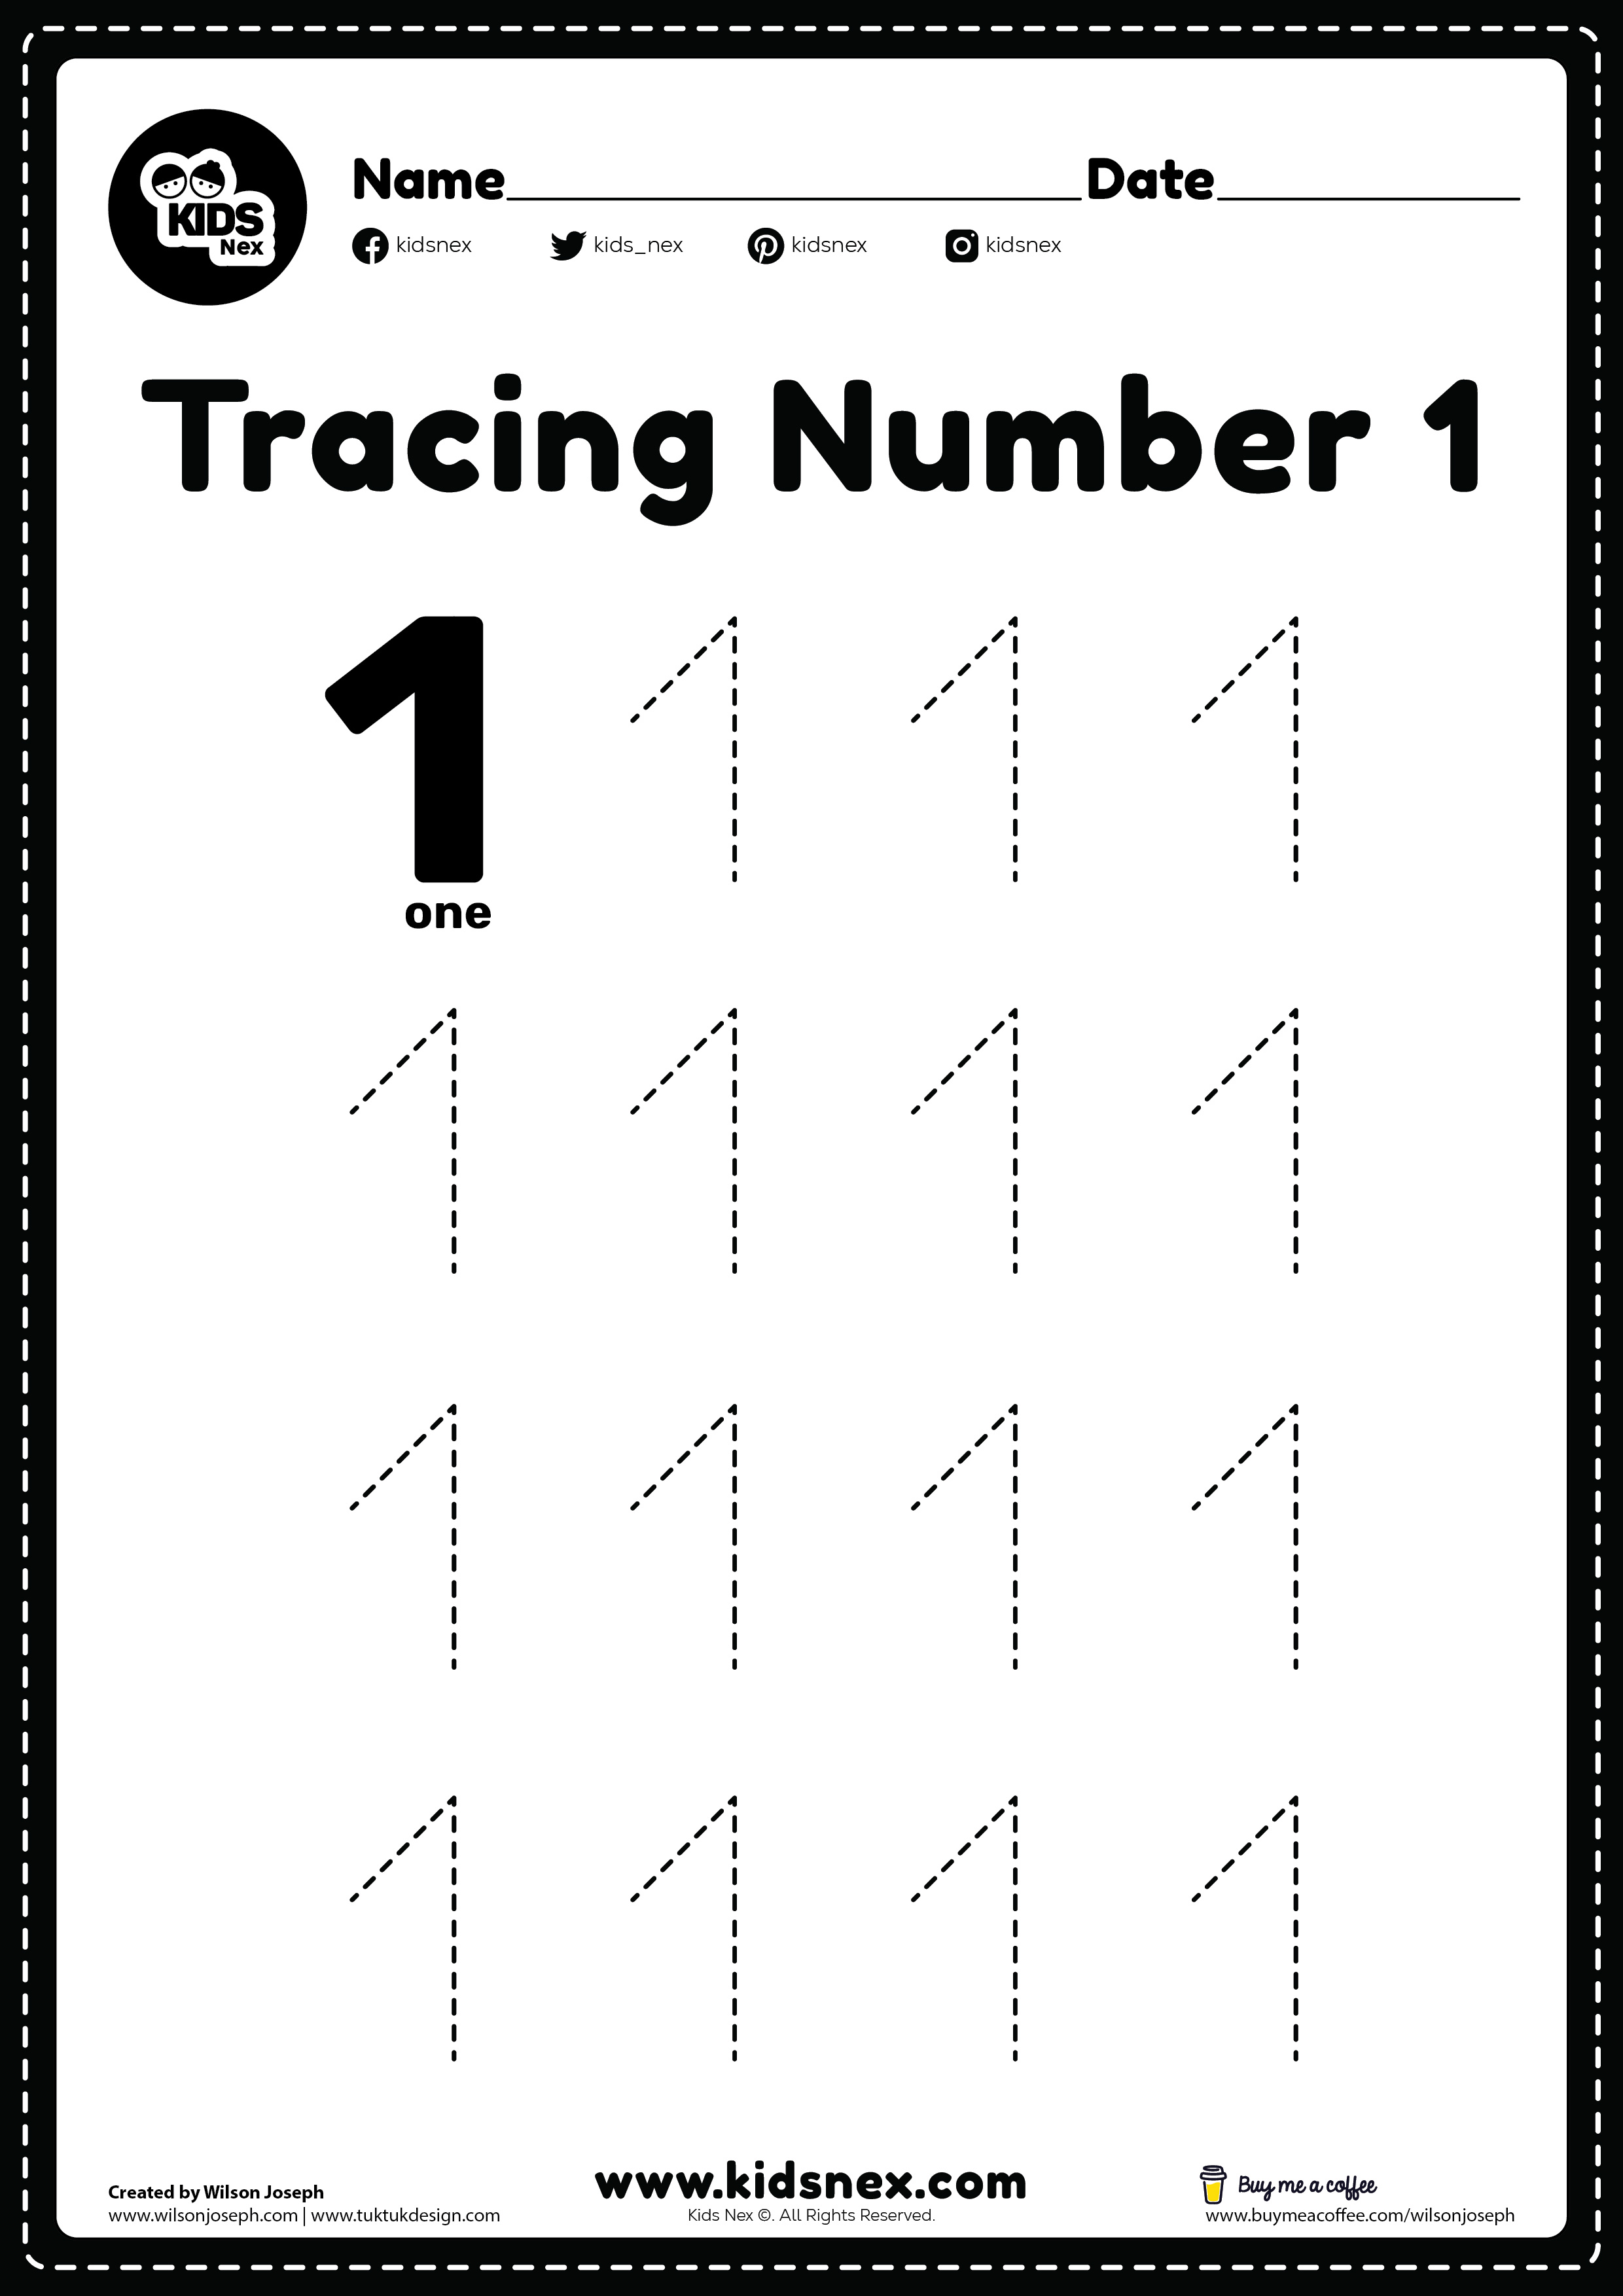 Number1 tracing worksheet for preschool and kindergarten kids for tracing practice in a free printable pdf page